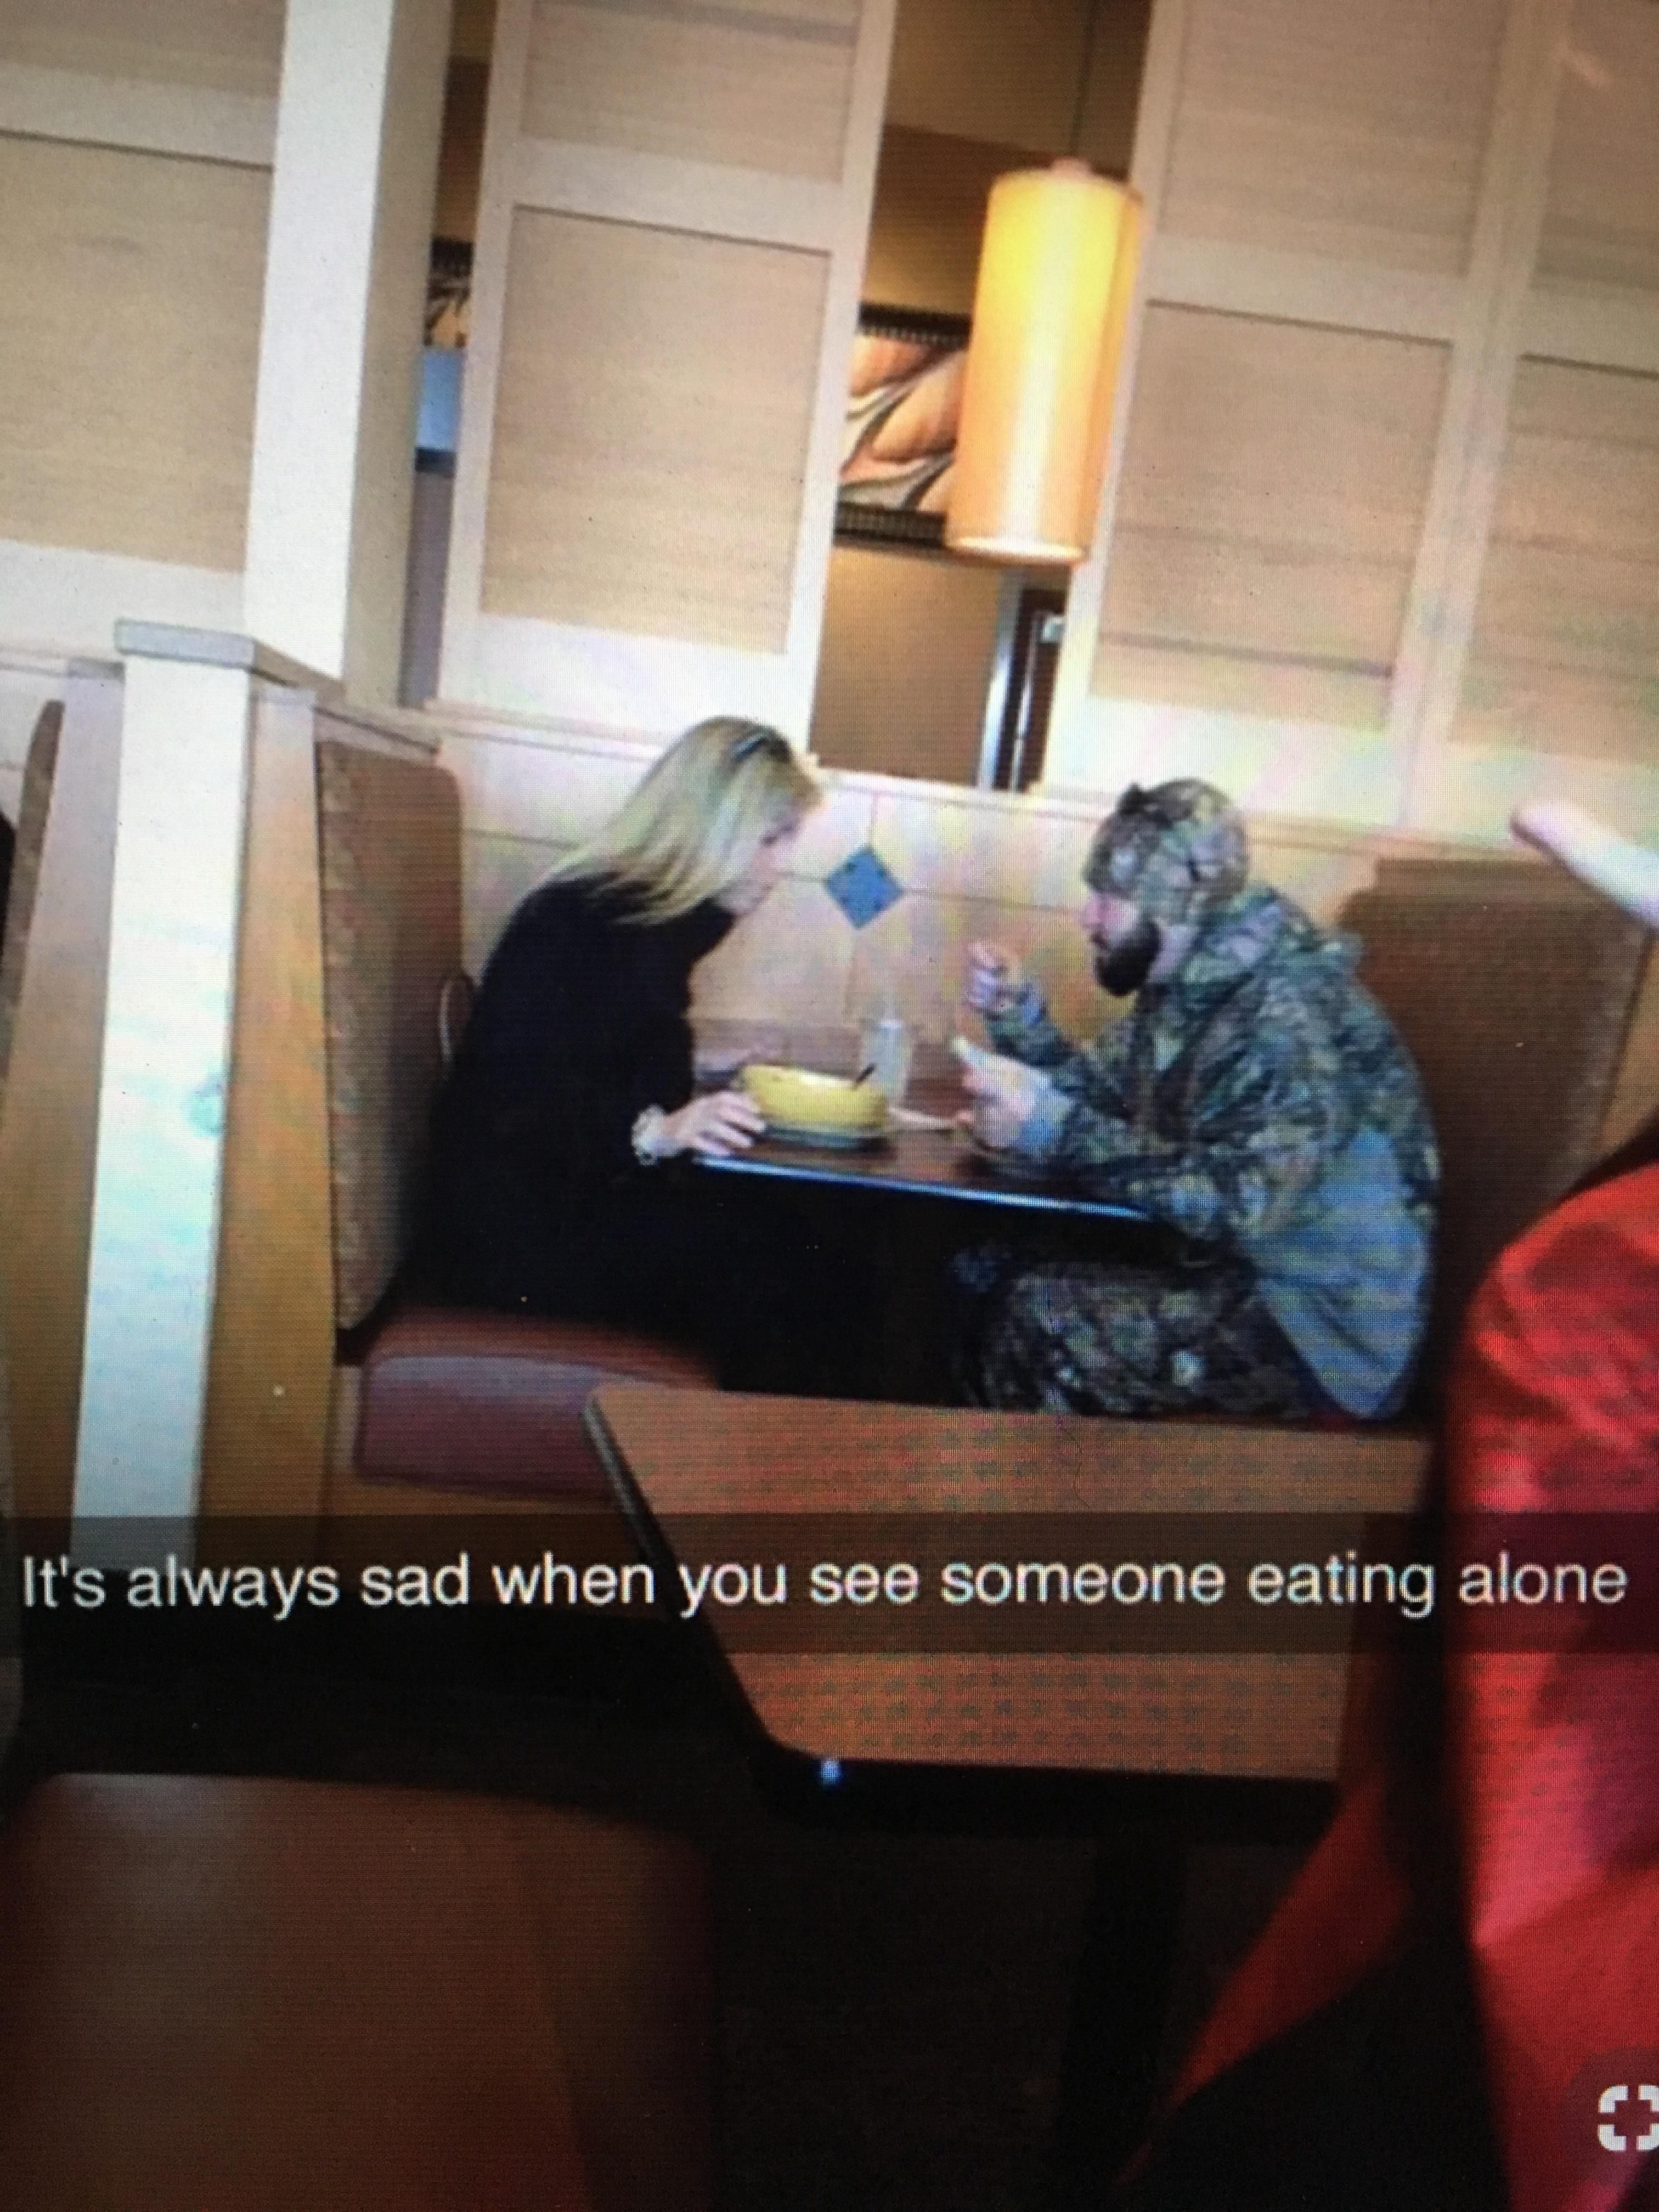 Eating alone